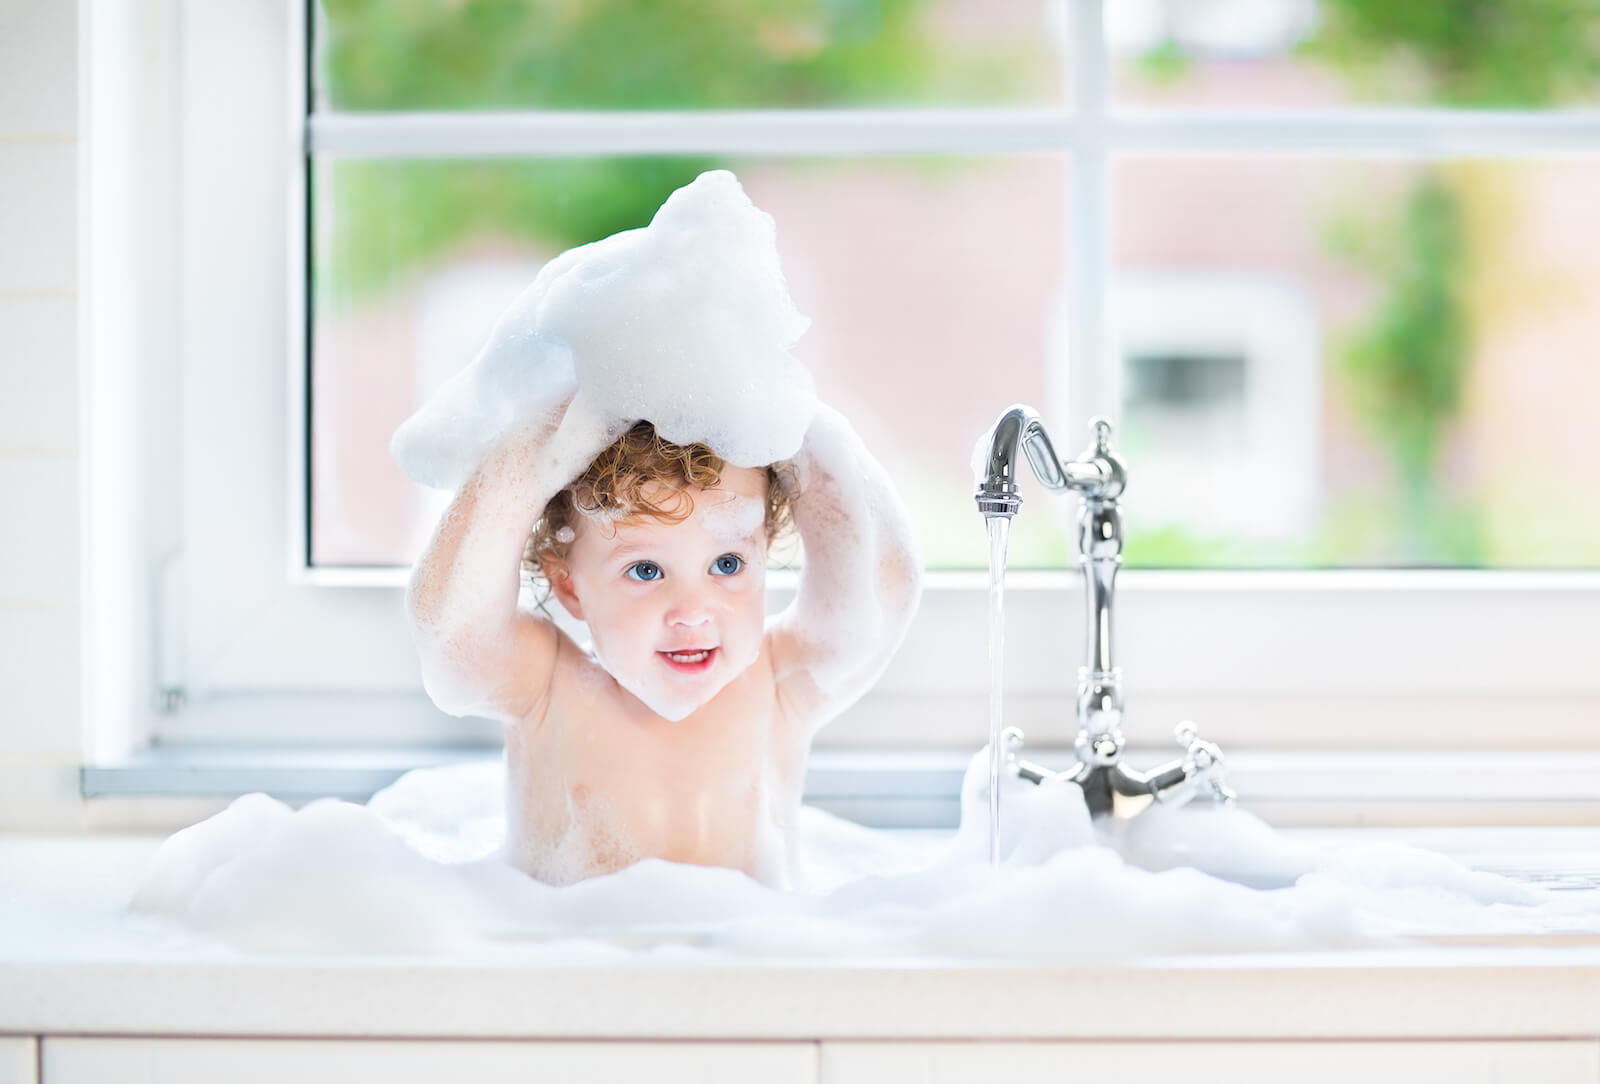 Are You Expecting A Baby? If So, Then You Need a Water Softener!